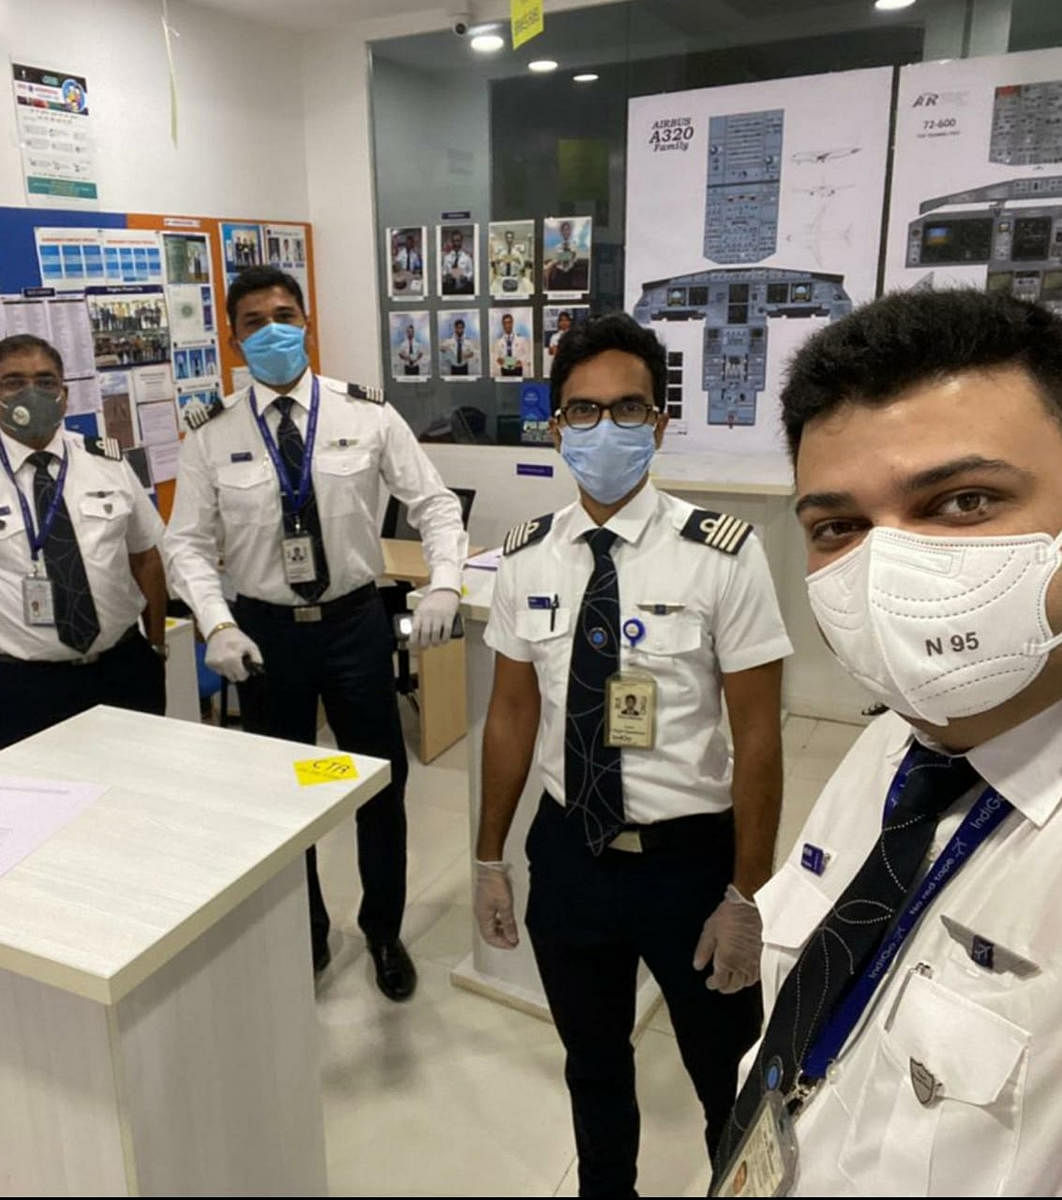 All Indigo pilots went through a rigorous 40-module training programme during the lockdown, and took a test. They also attended online yoga and Zumba sessions to stay physically fit.